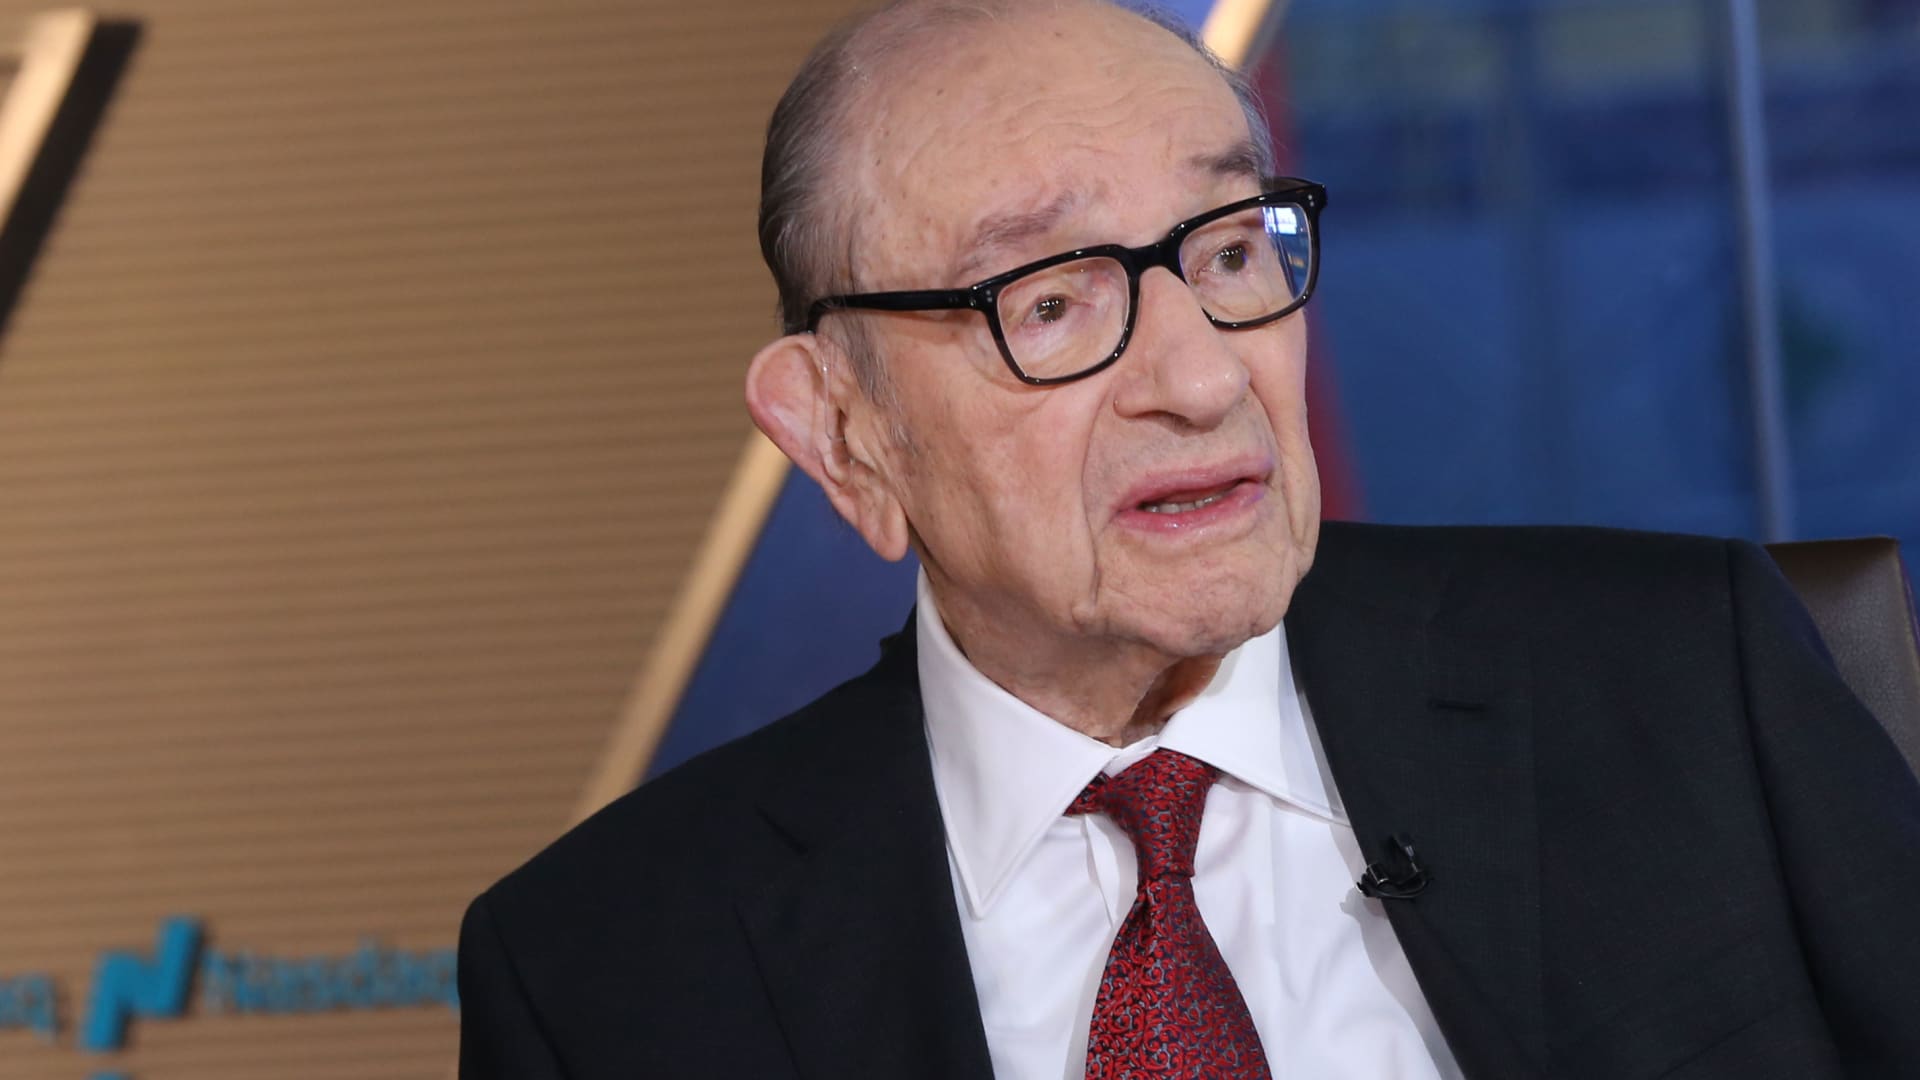 Alan Greenspan: This is the tightest labor market I've ever seen